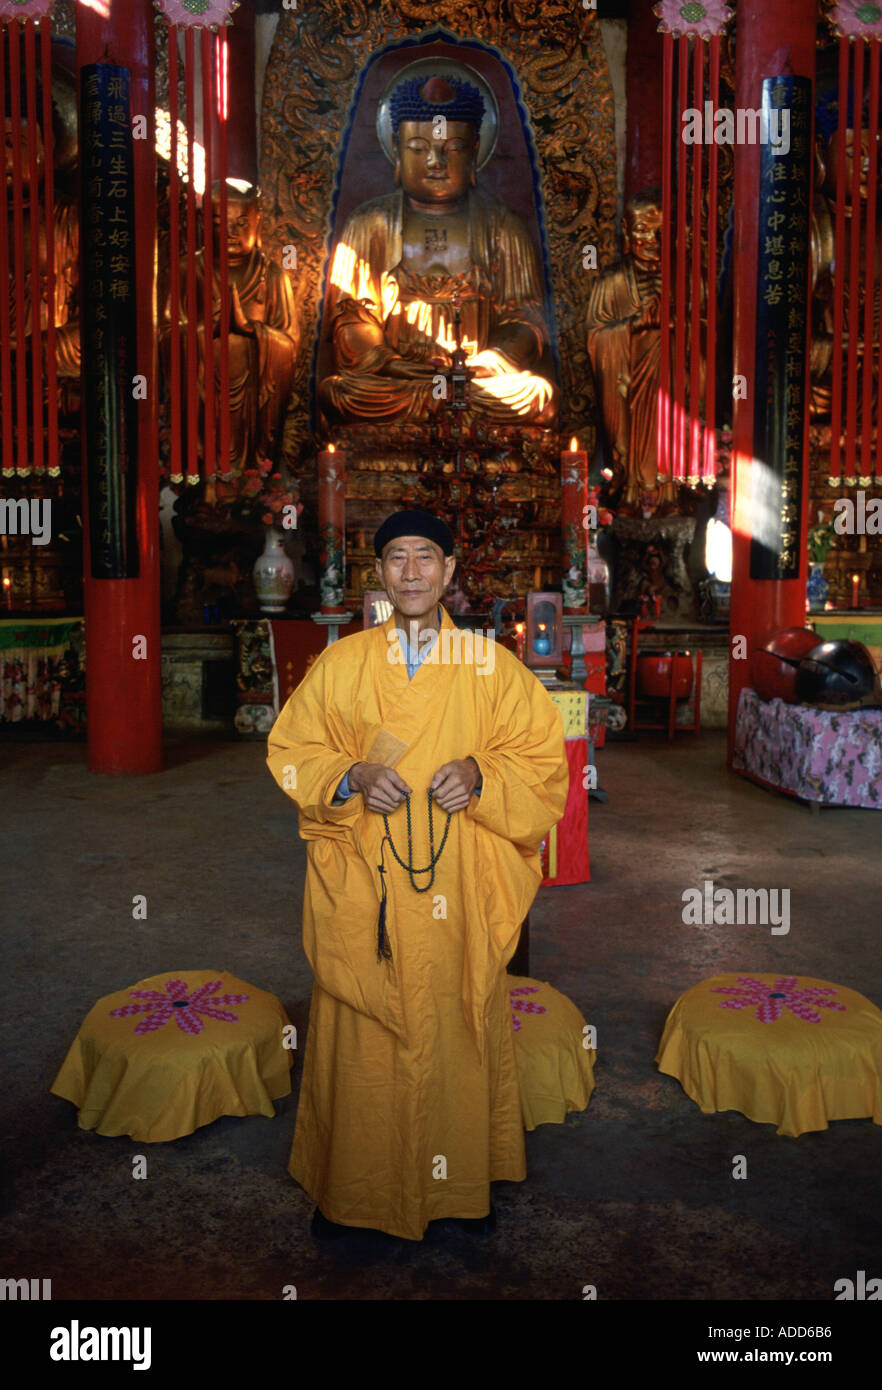 Buddhist monk in saffron robes praying at Buddha statue at the Buddhist Temple in Huating China Stock Photo